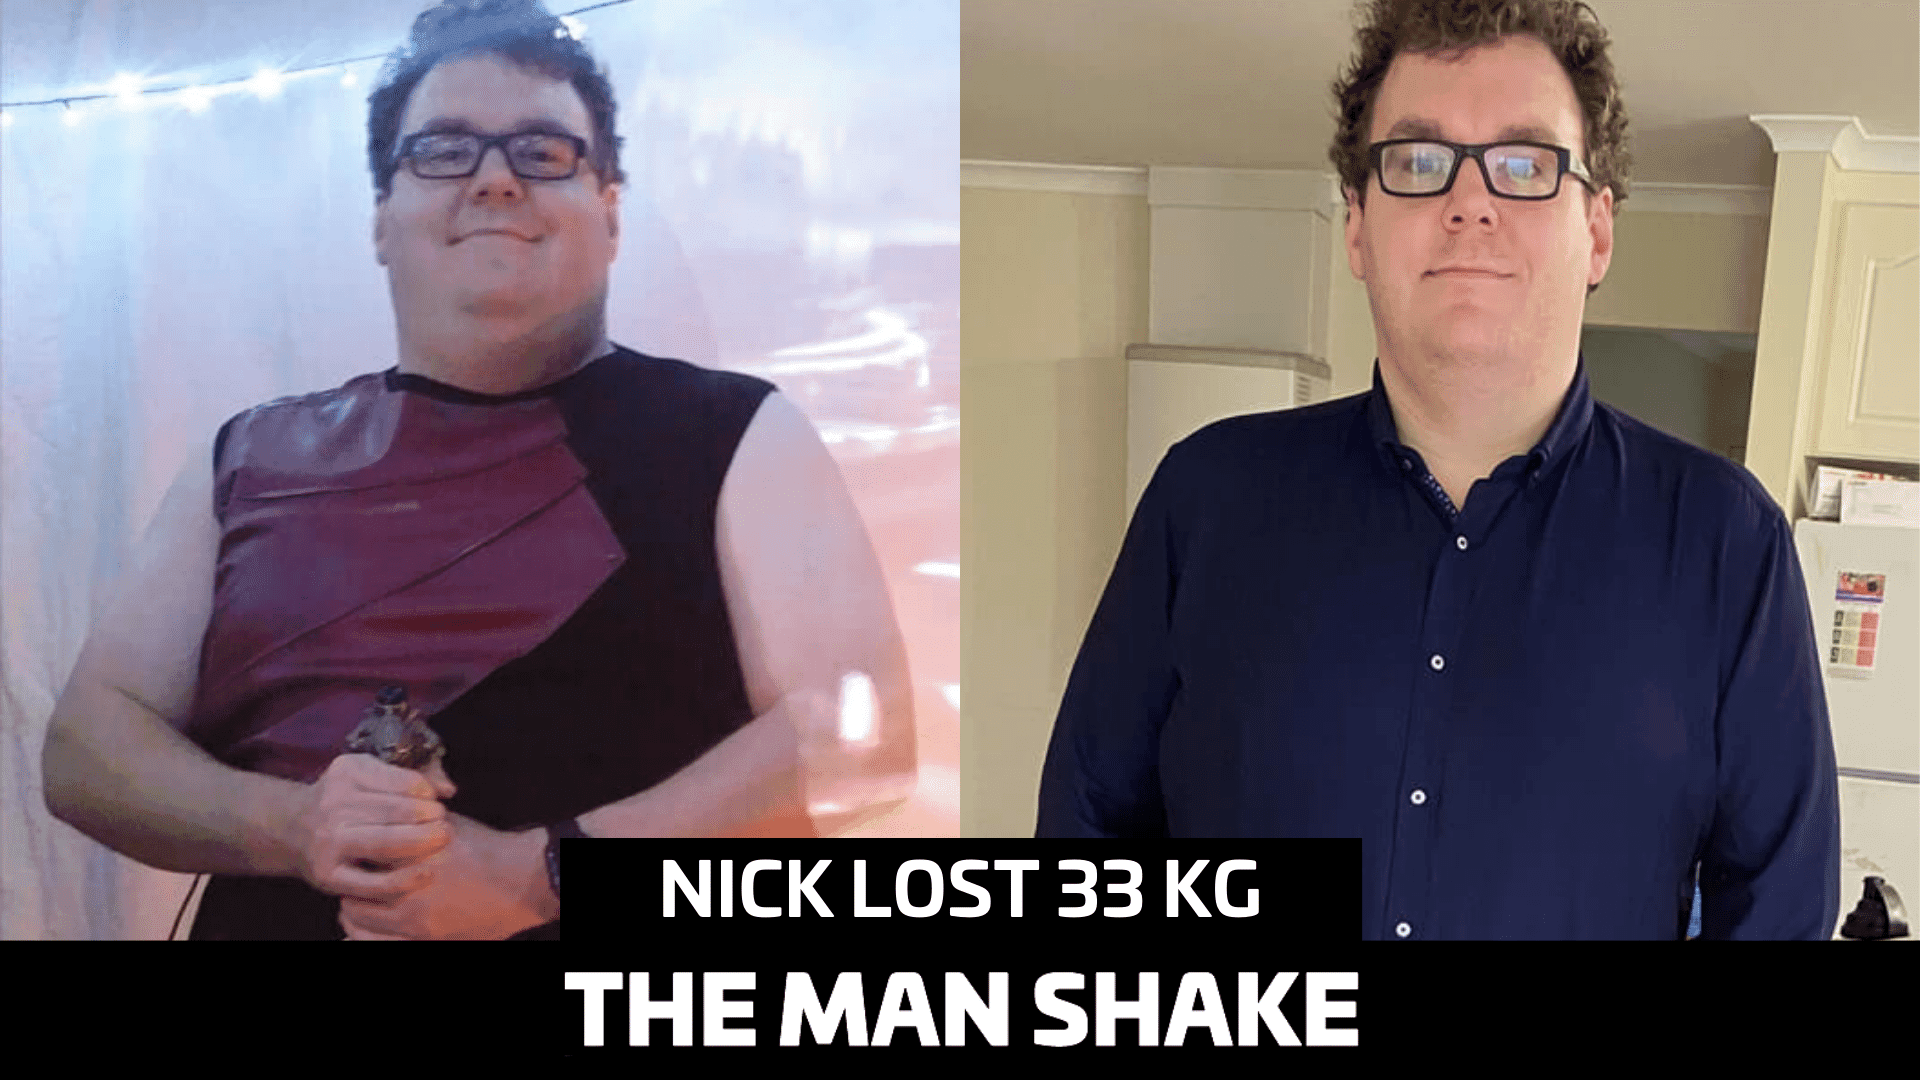 Nick just wanted to be happier so he lost 33kg!